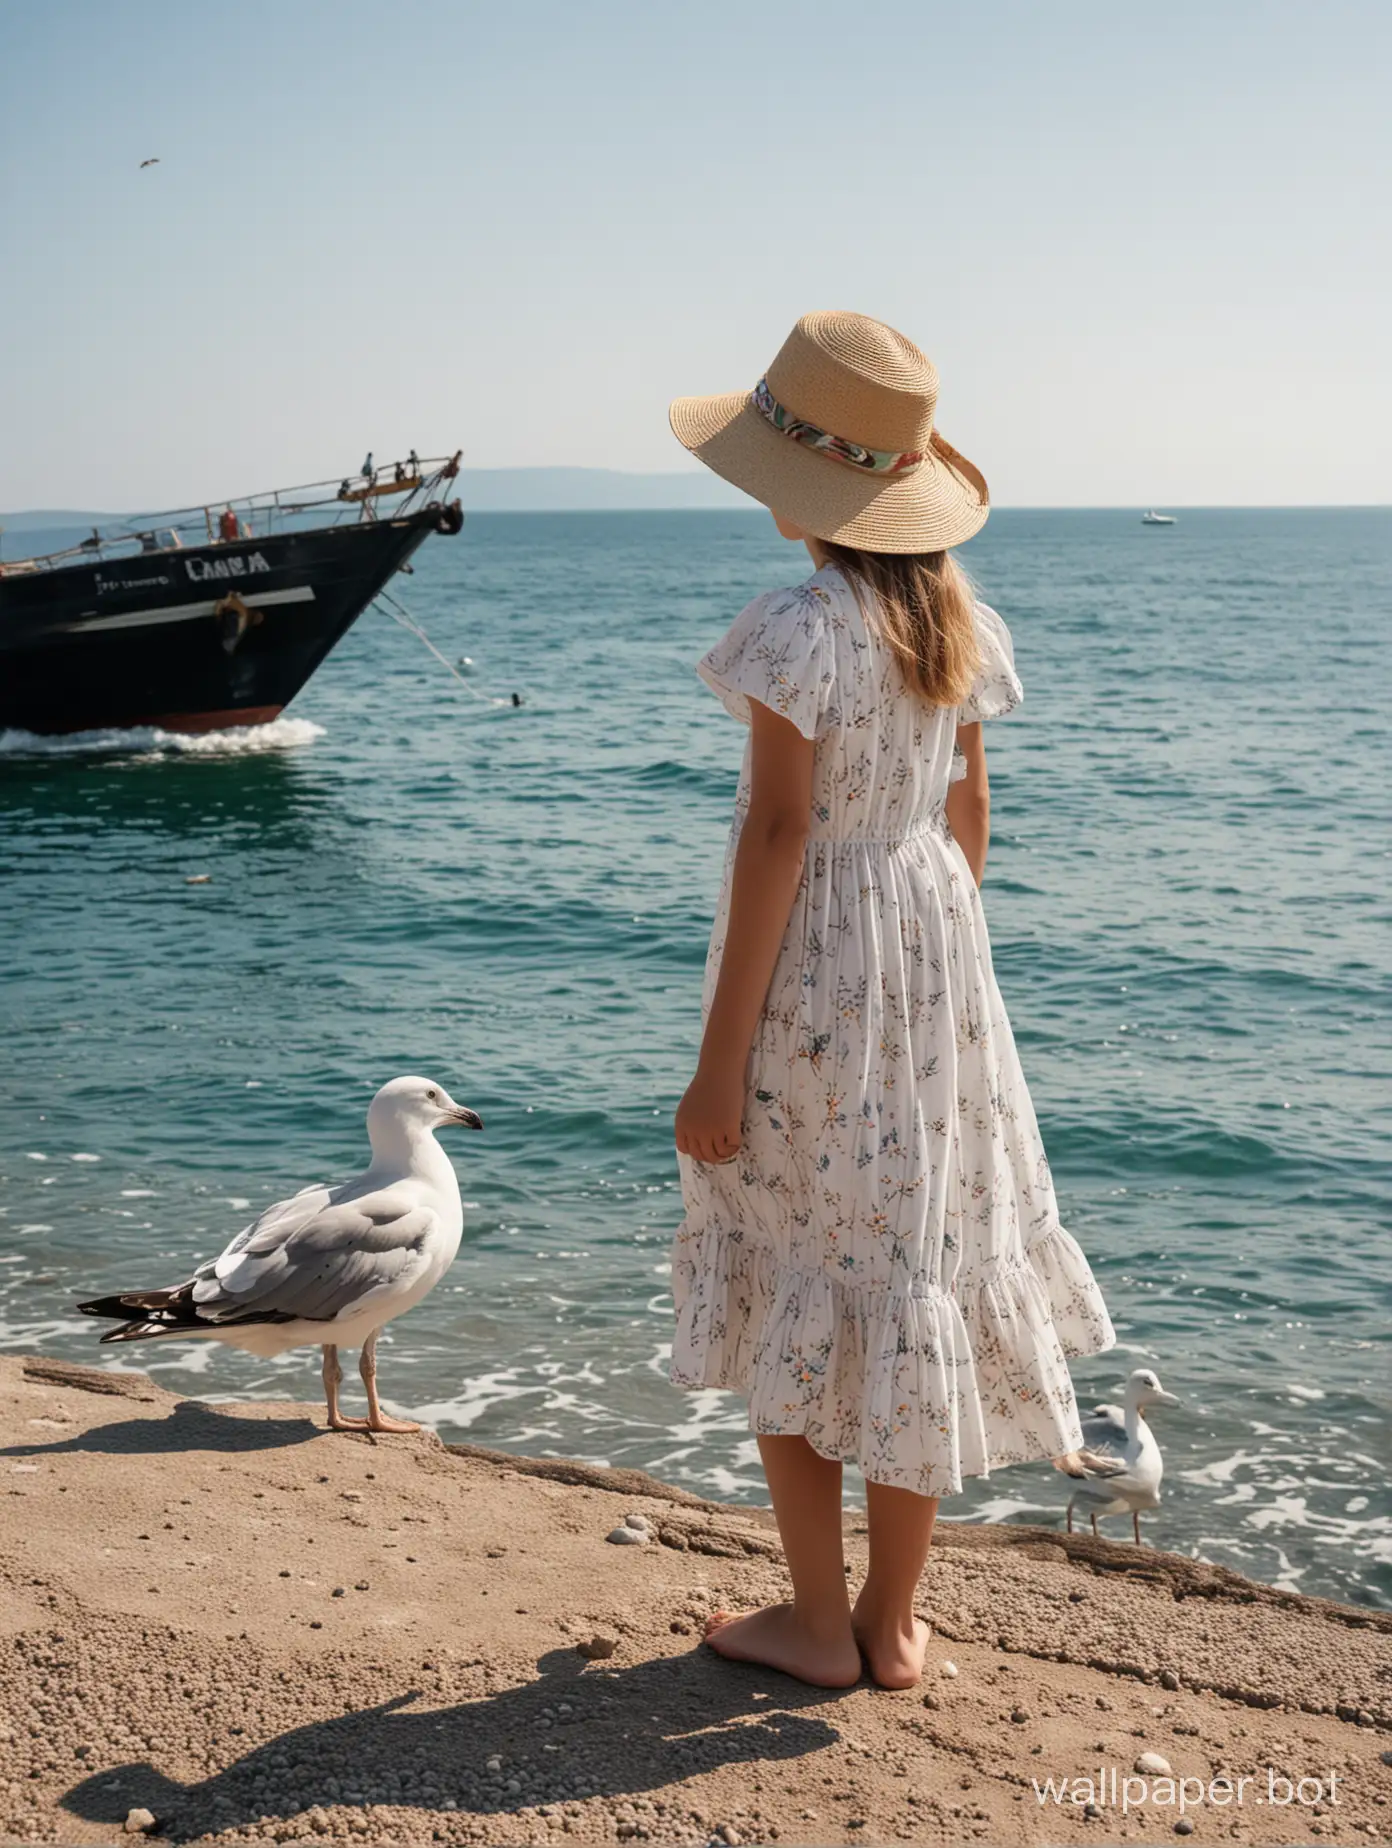 Summer-Scene-11YearOld-Girl-in-a-Dress-by-the-Black-Sea-with-Distant-Ship-and-Seagull